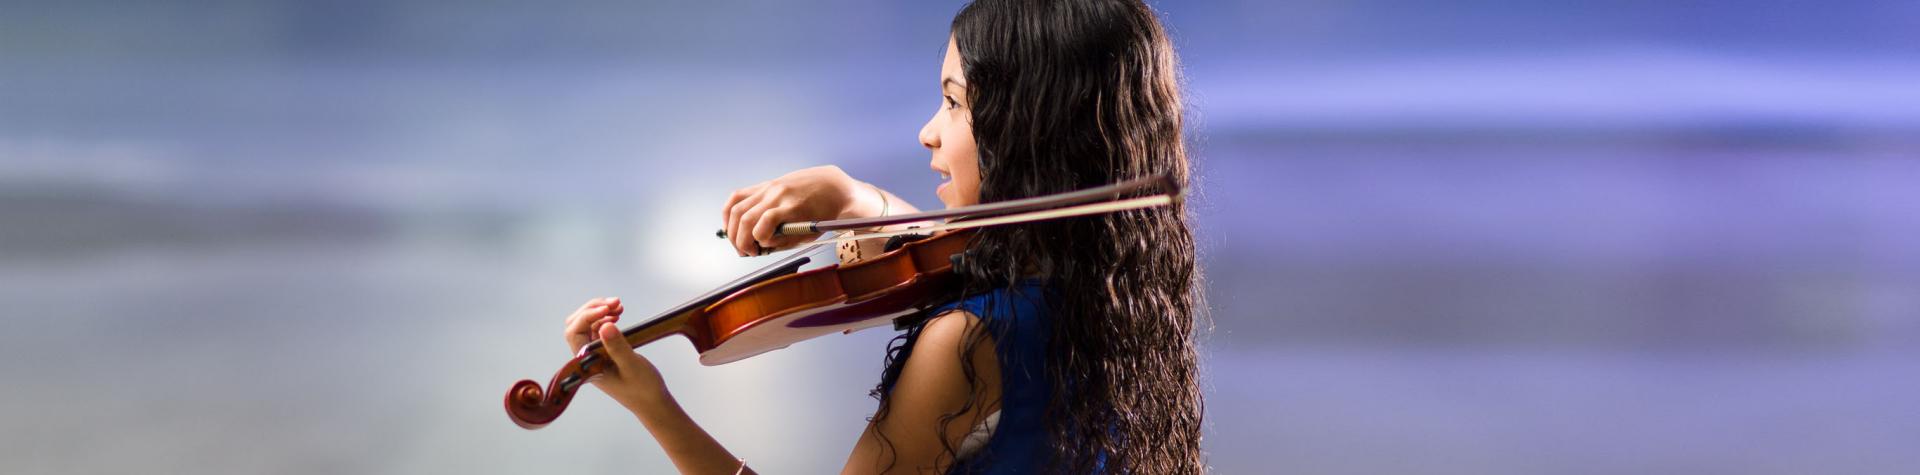 Why Study Music? Girl playing the violin